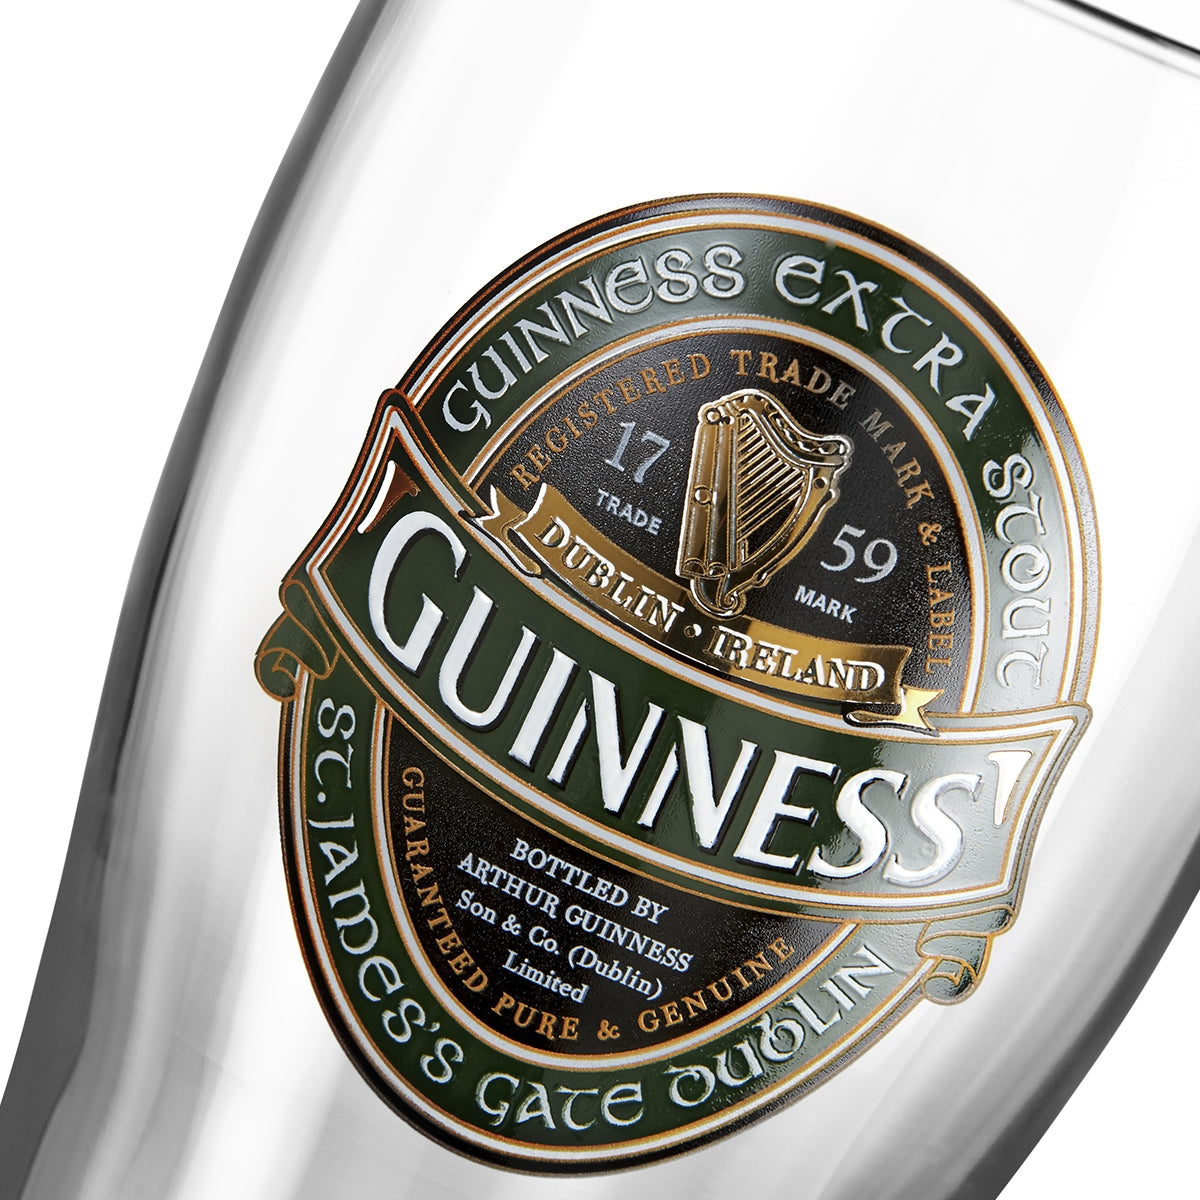 A Guinness Ireland Collection Pint Glass Twin Pack with a Guinness Extra Stout label.